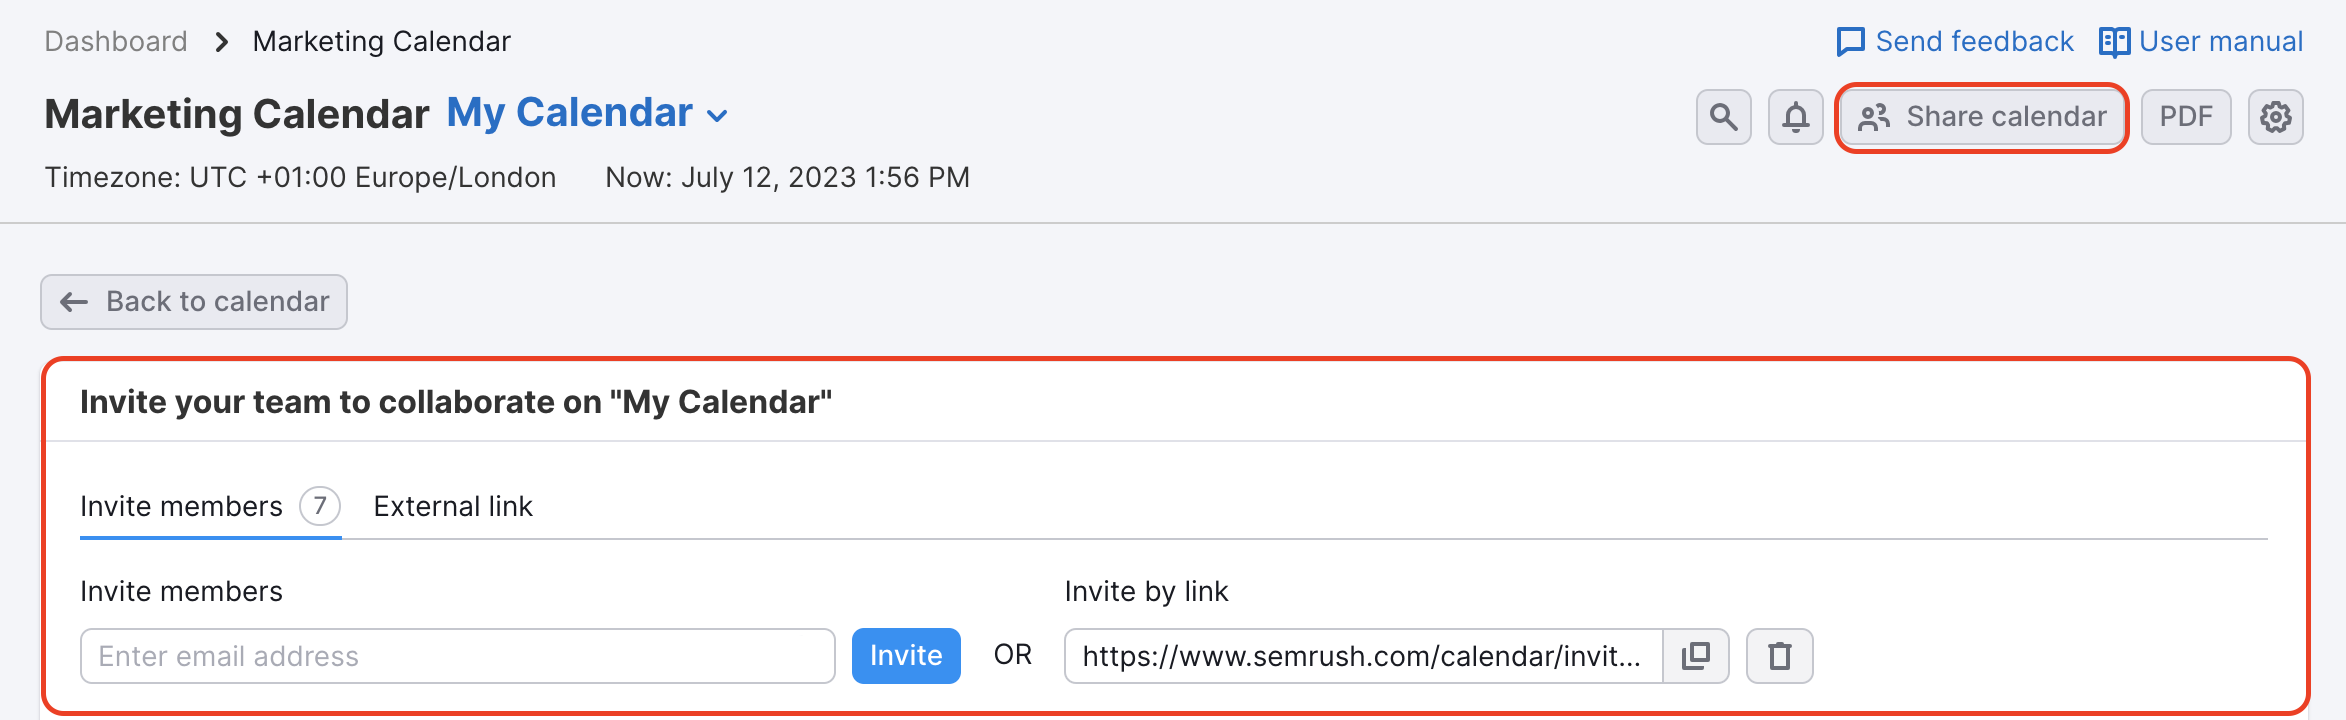 Sharing menu in Marketing calendar that can be opened by clicking the Share calendar button highlighted with a red rectangle  in the top-right corner. There's an option to invite members via email or by sending a link. 